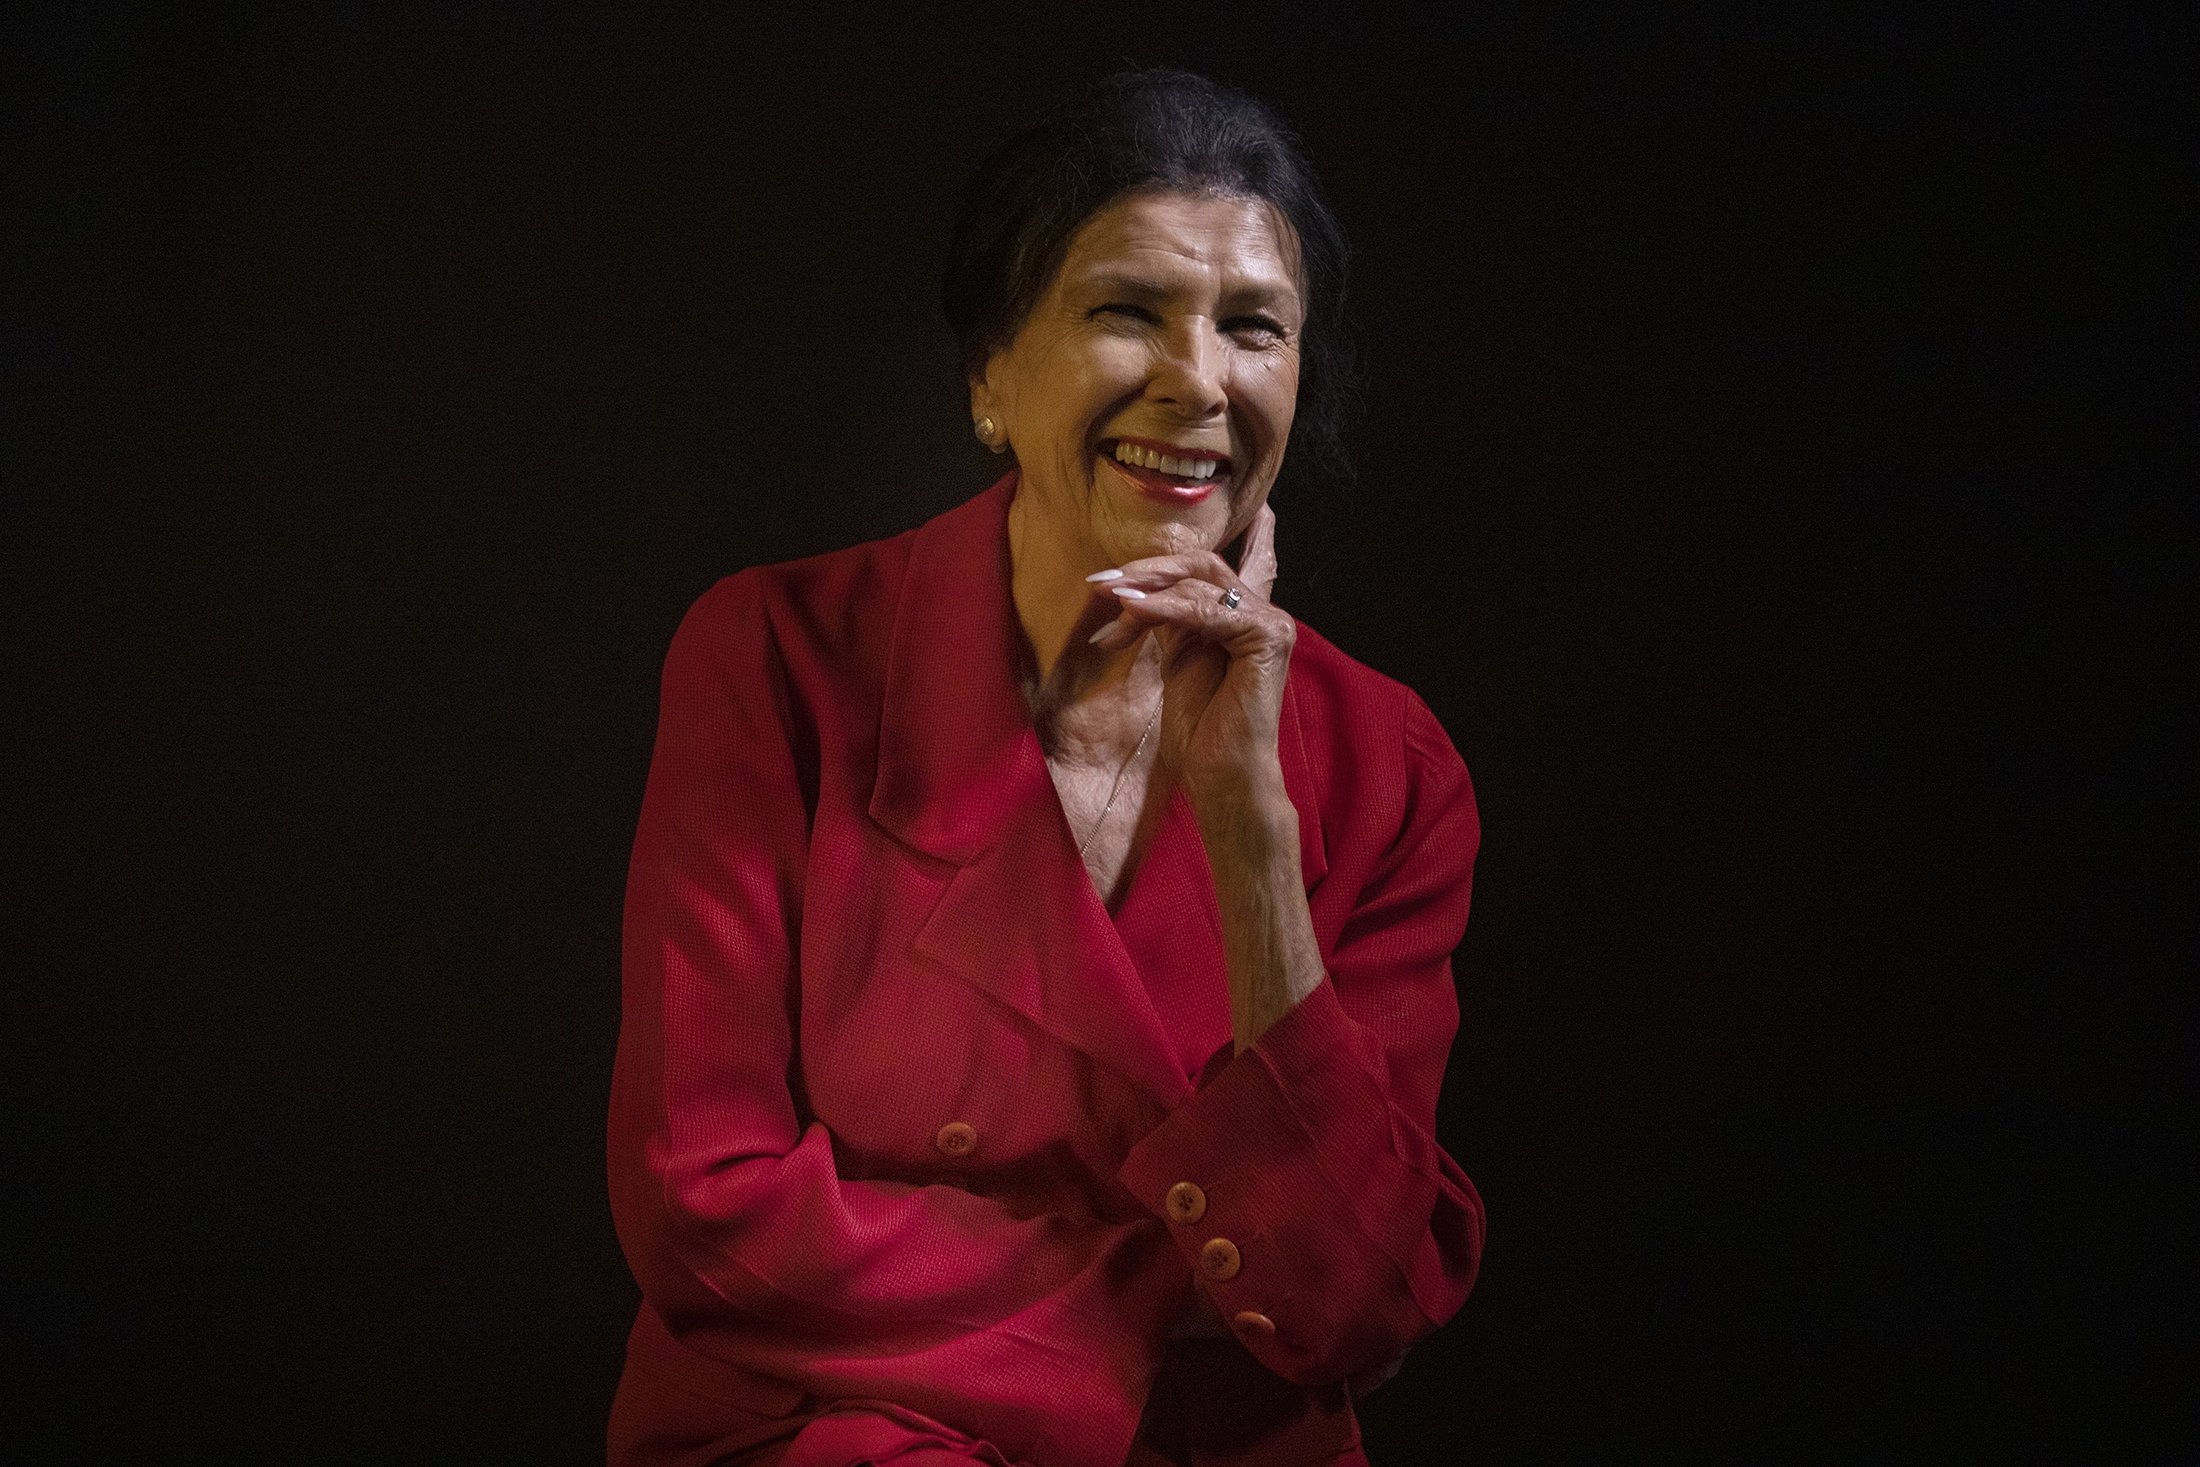 Filmmaker Alanis Obomsawin is photographed at the Toronto International Film Festival in Toronto, Canada, Sept. 6, 2019. (AP Photo)